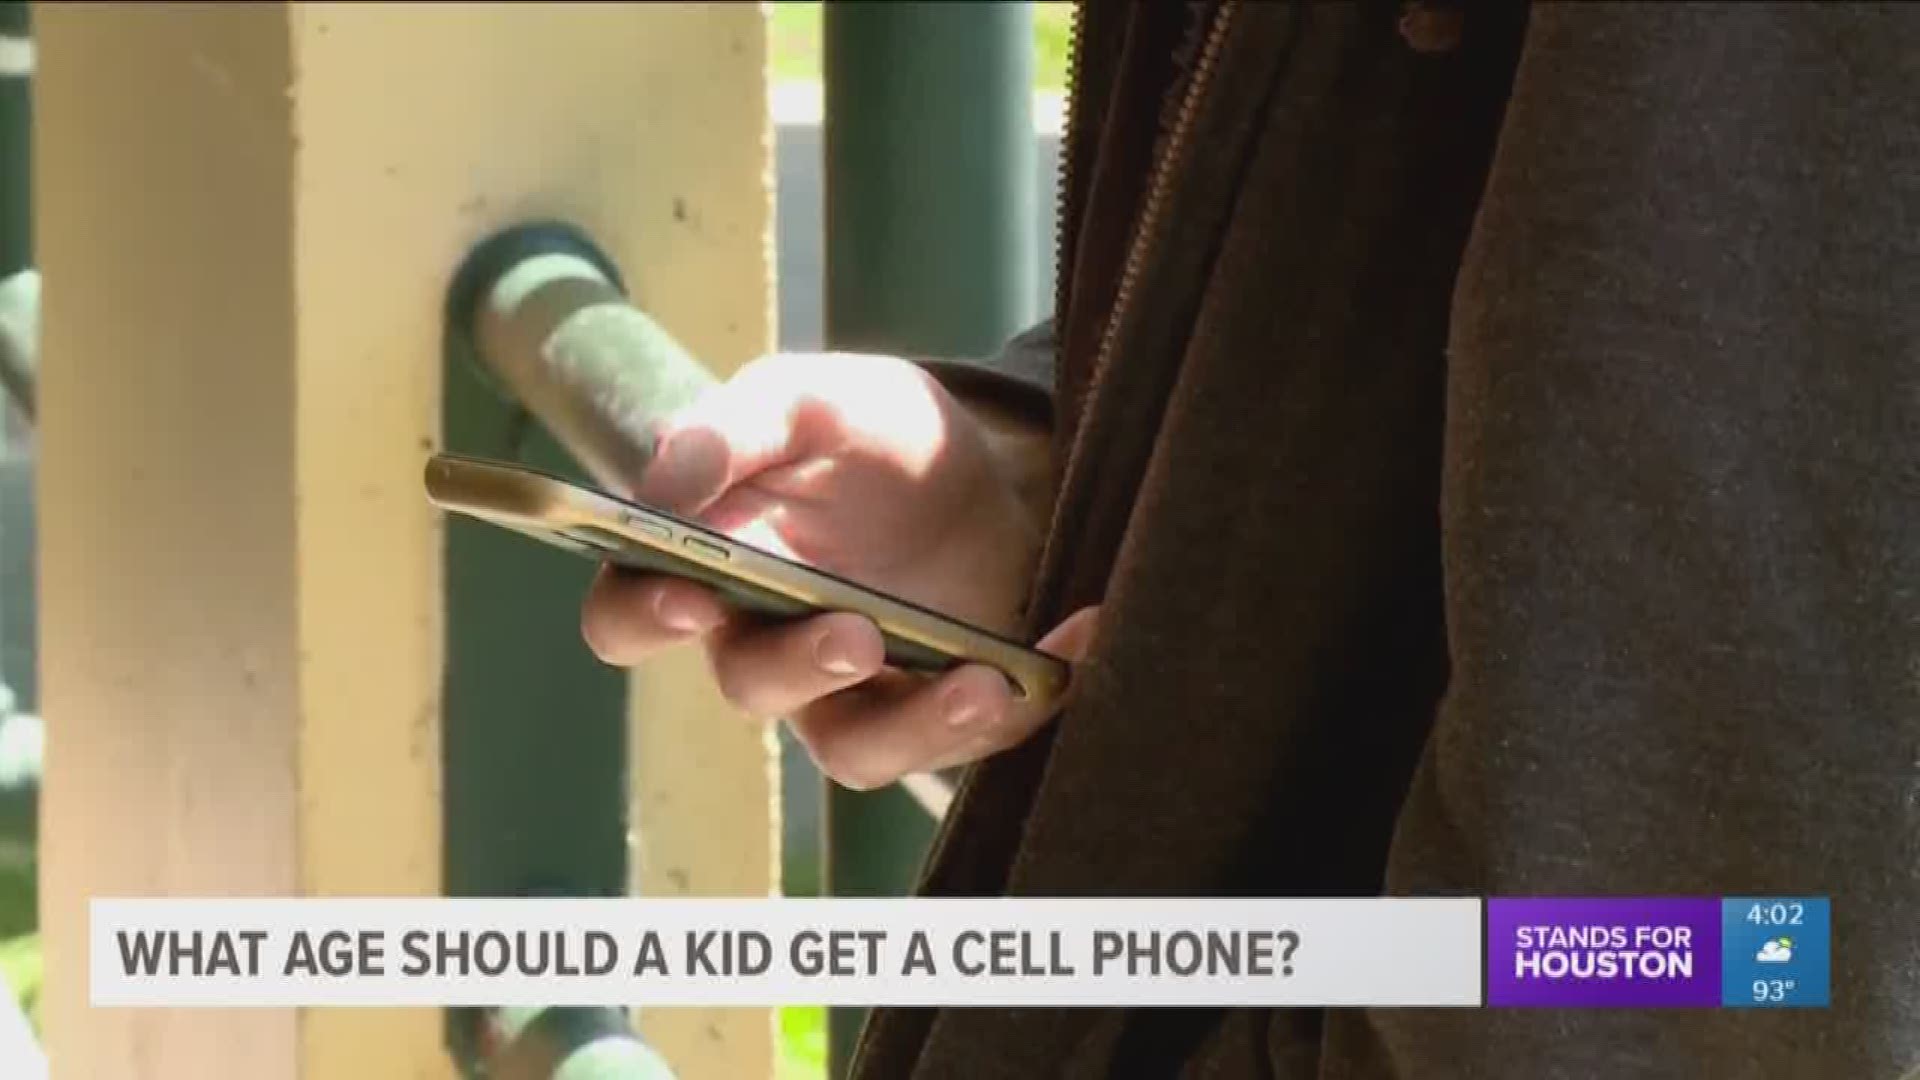 How young is too young for someone to get a cell phone? Parents and experts weigh in.